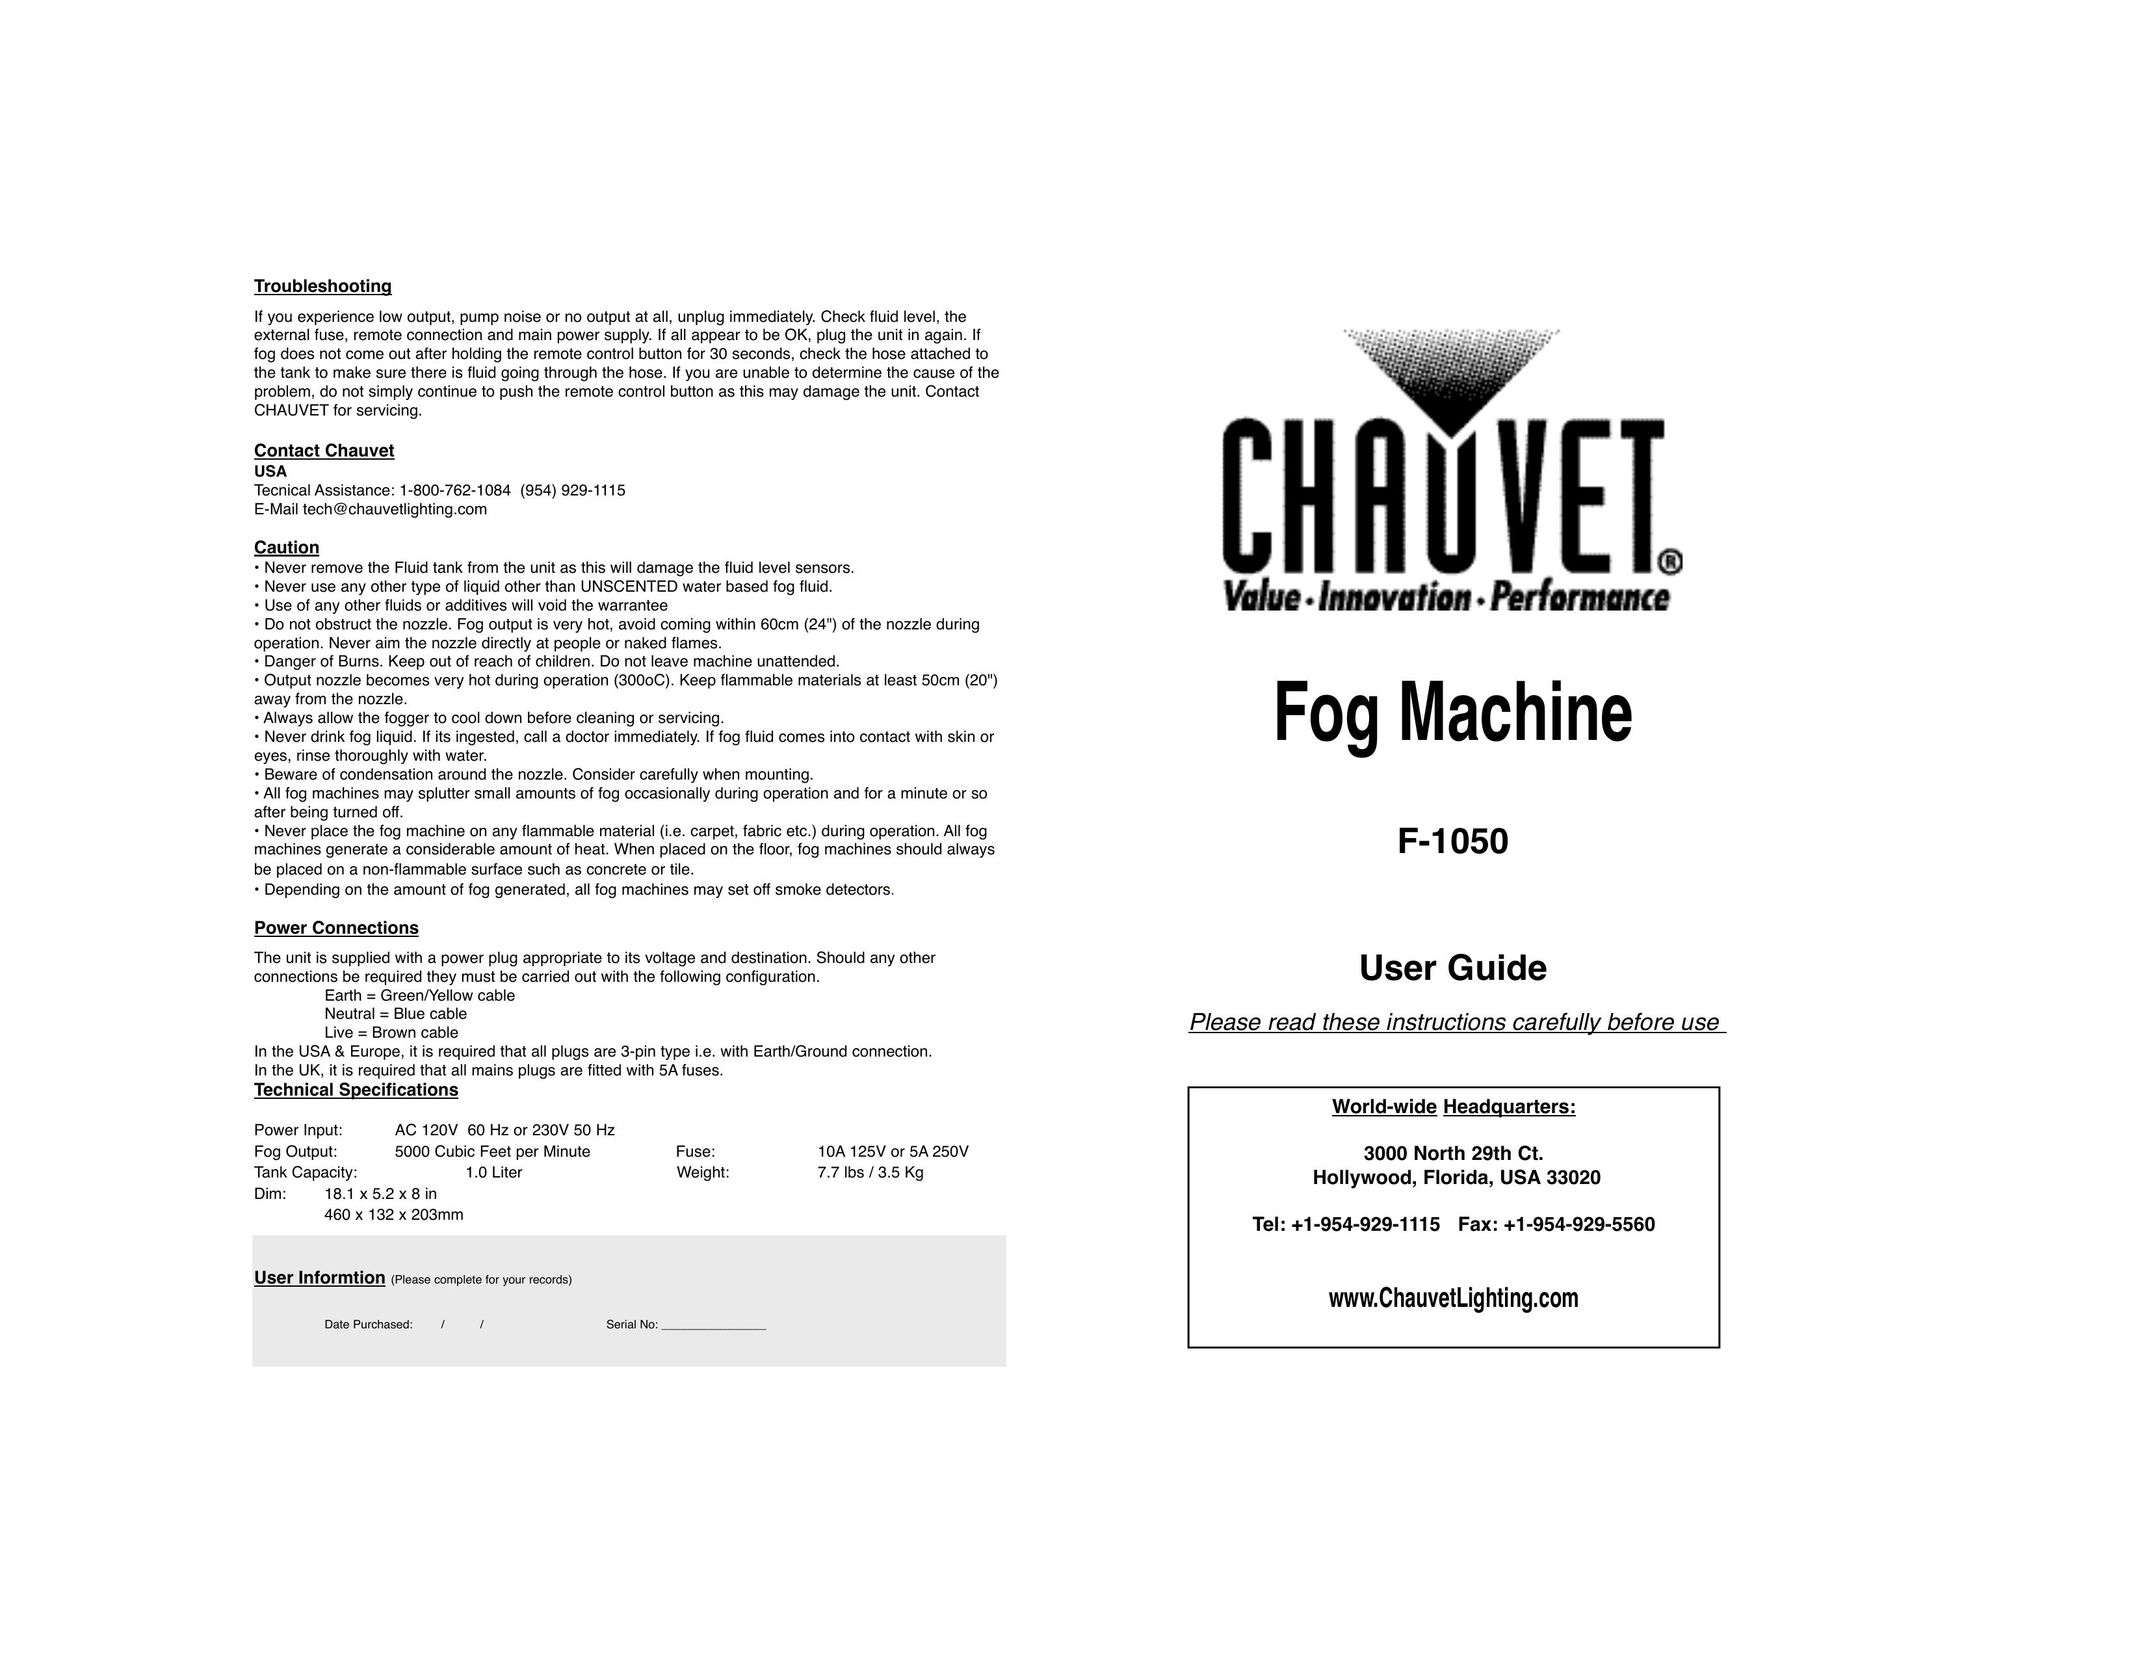 Chauvet F-1050 All in One Printer User Manual